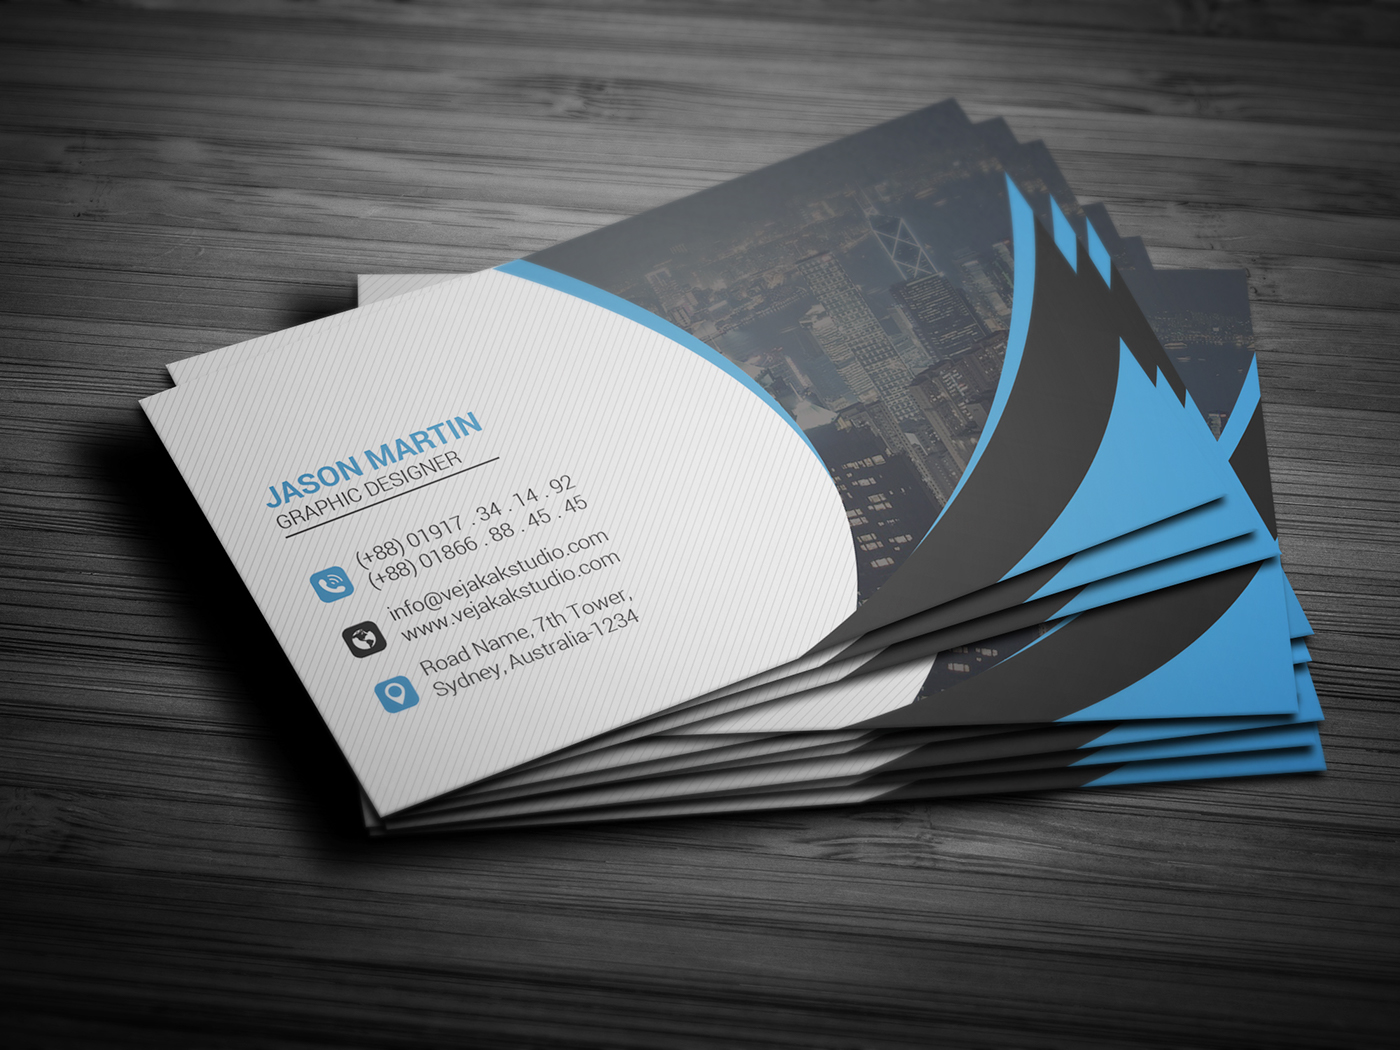 Free Business Cards Business Cards corporate business cards free download cards free visiting cards freebie business cards free download name cards freebie